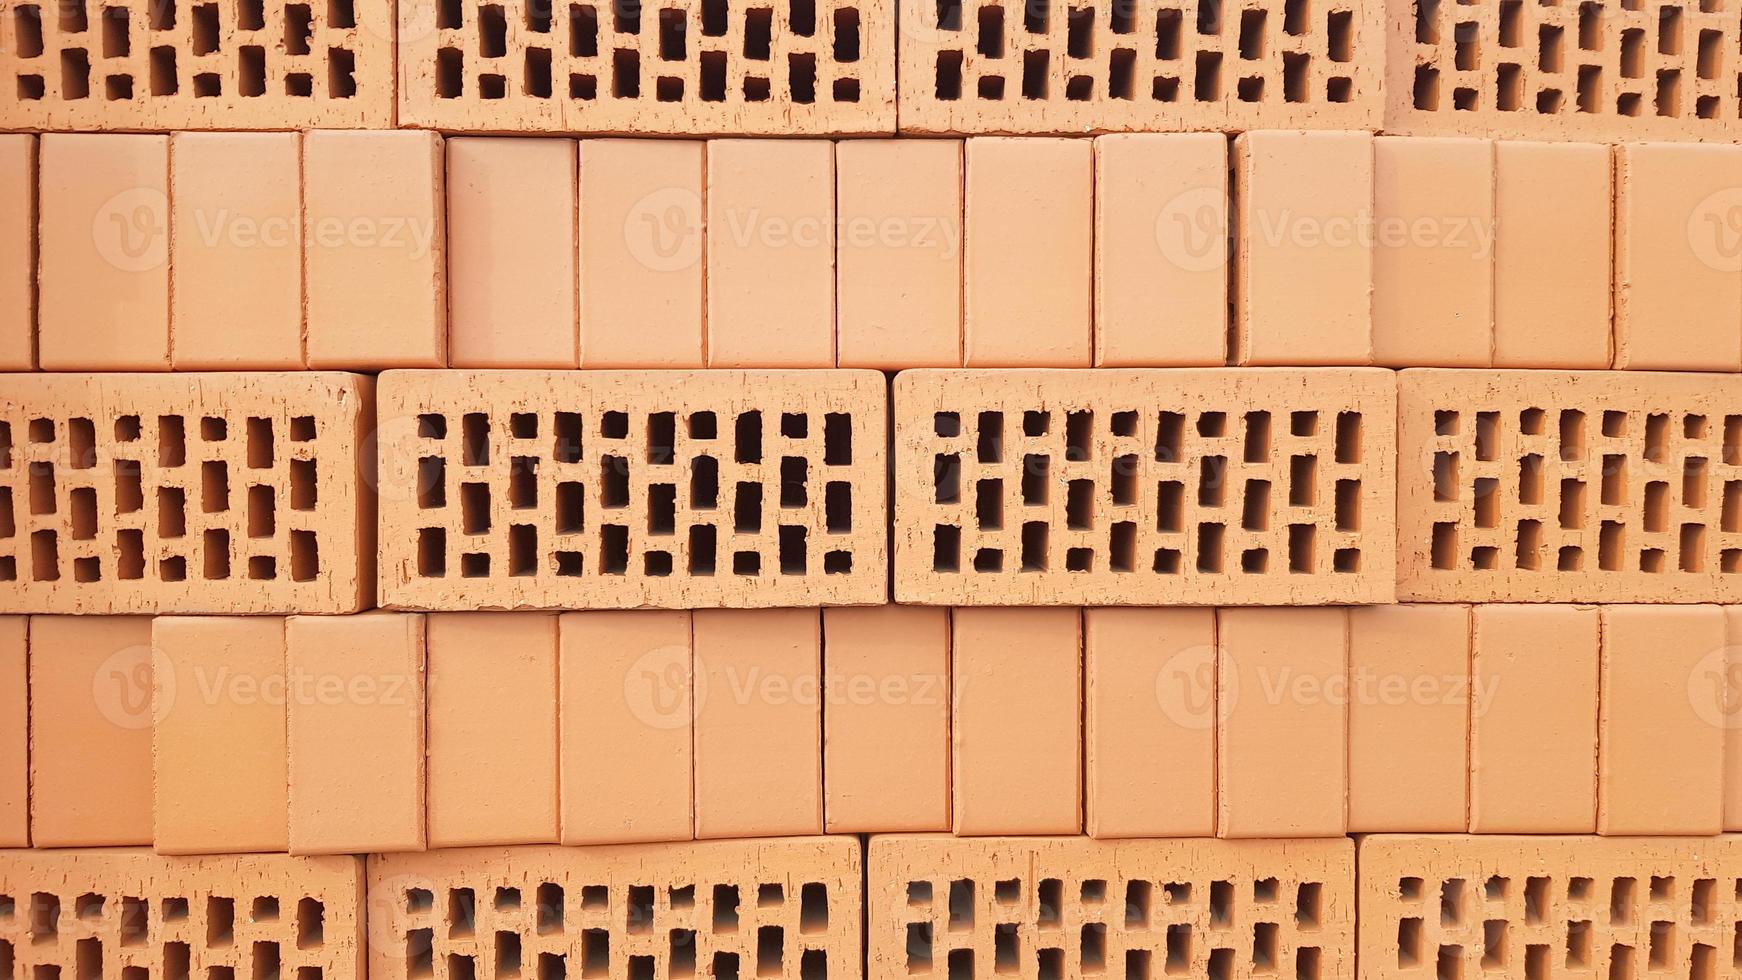 Red brick background with holes. Red perforated brick with rectangular holes. Rough texture of rows of red light bricks. View of the corrugated side and perforated upper surfaces of the clay brick. photo